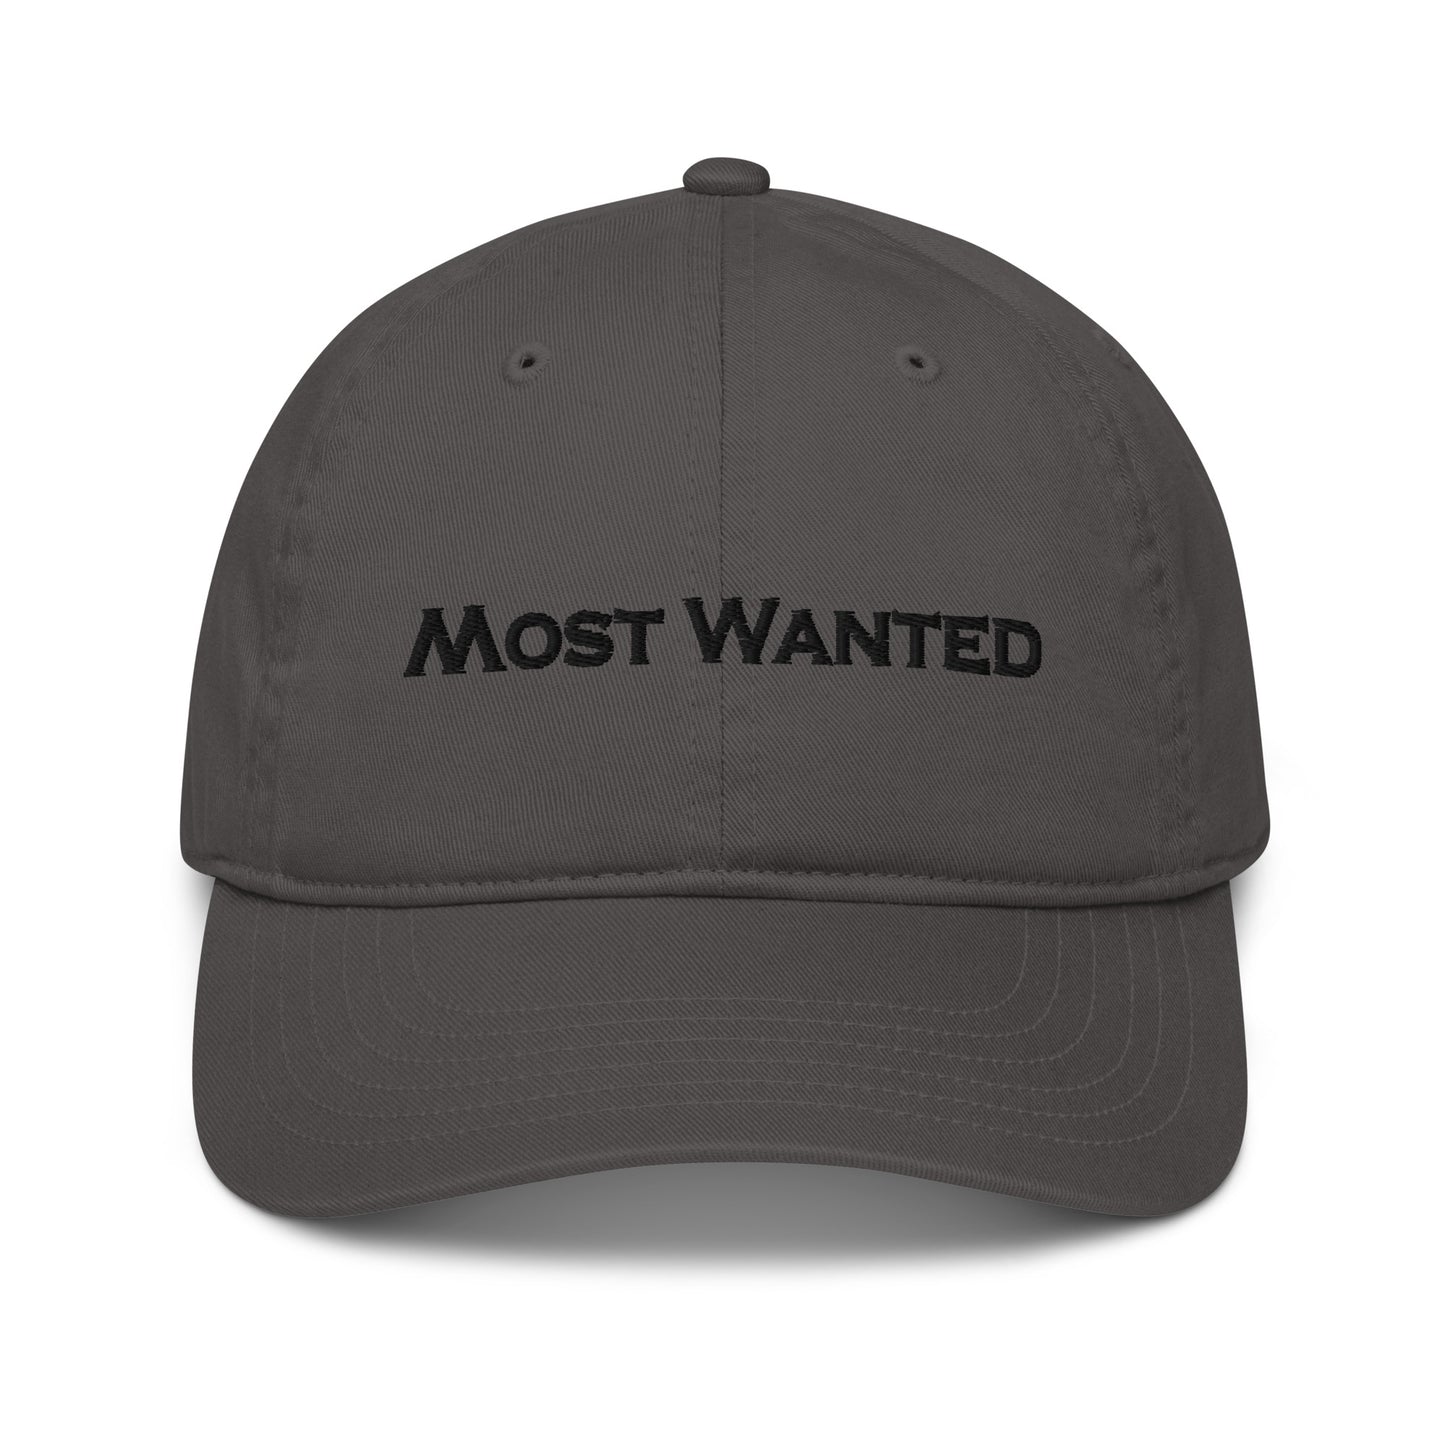 MOST WANTED DAD HAT ⭐⭐⚫⭐⭐